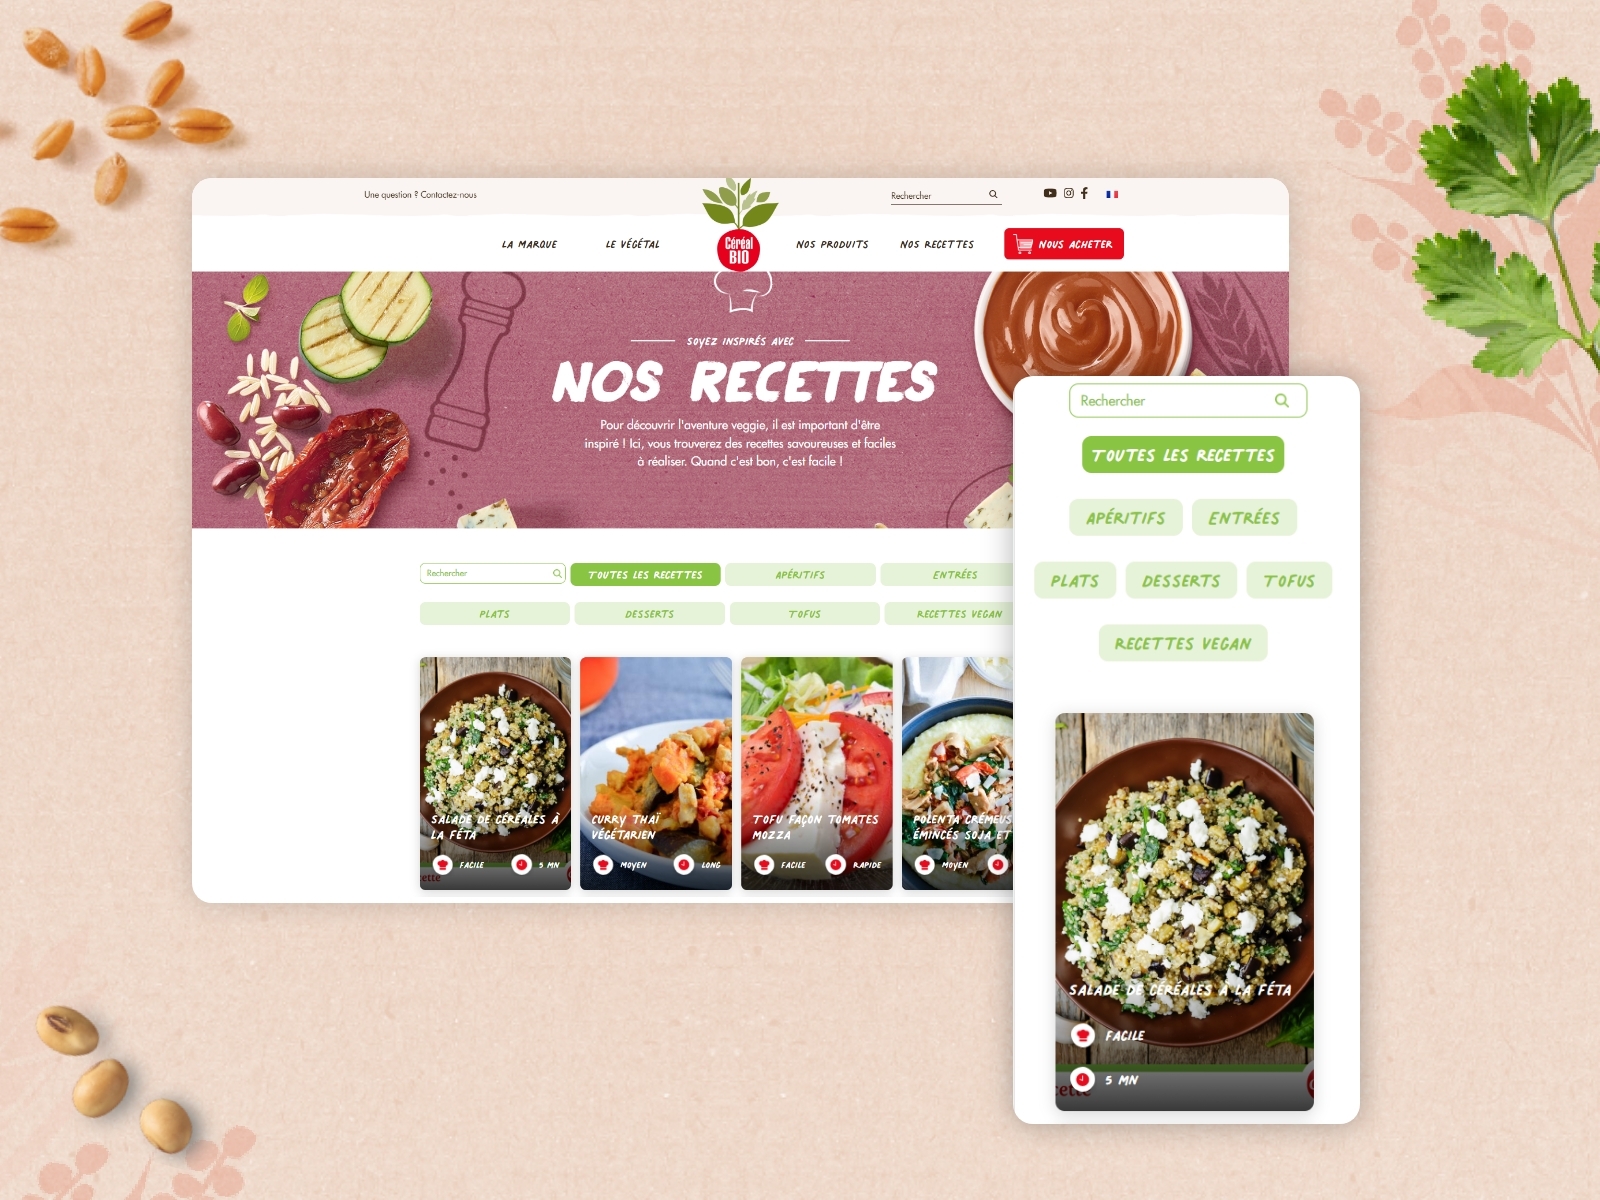 Products and recipes page